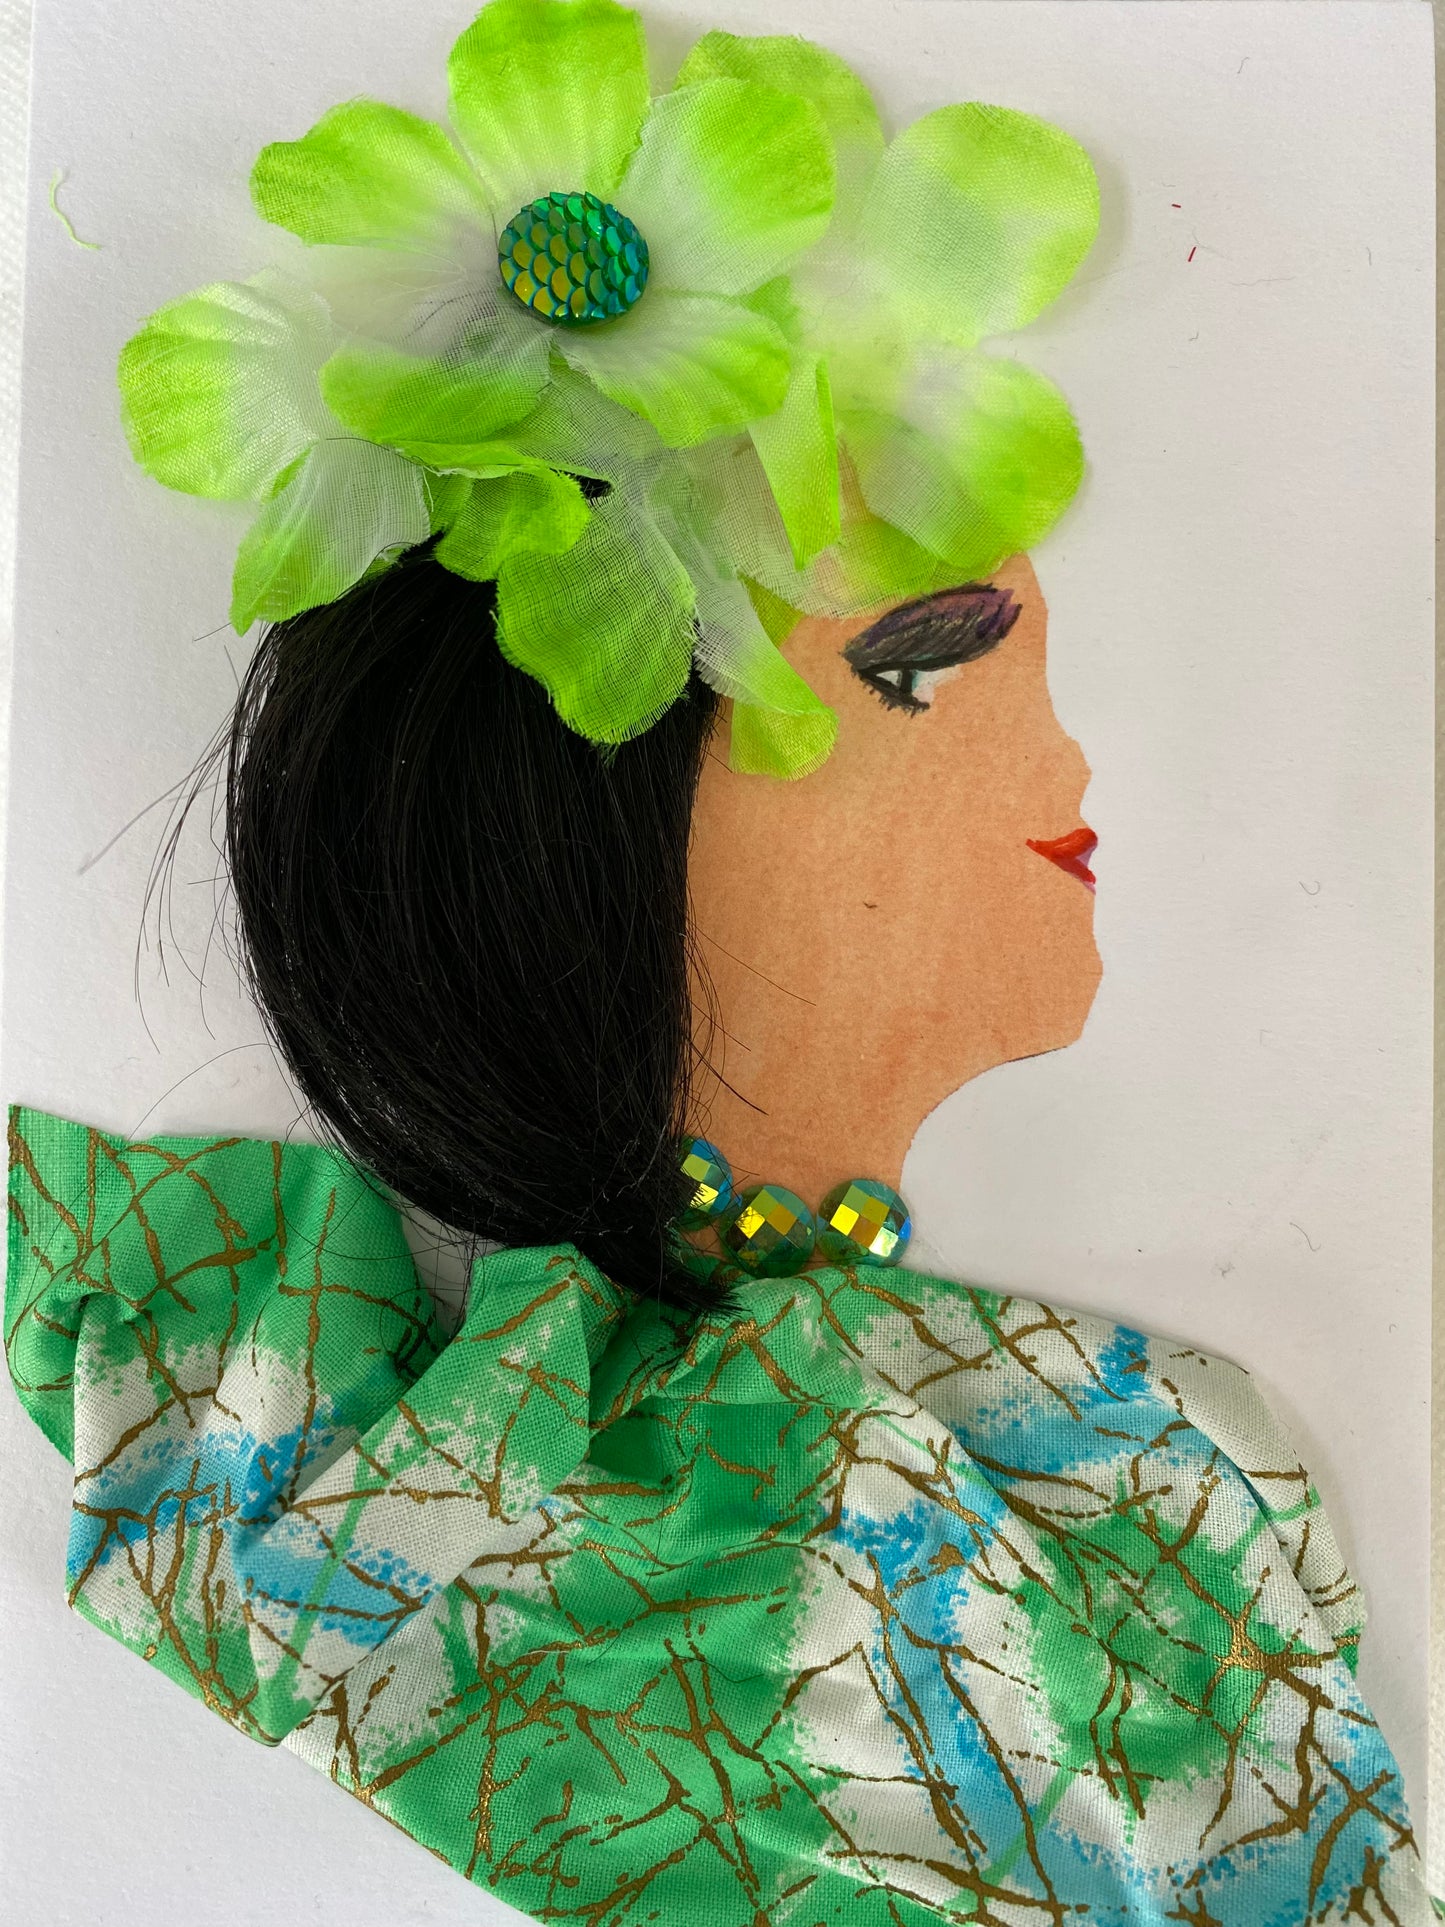 I designed this card of a woman named Georgia Great. She has a white skin tone and is wearing an electric green flower in her hair. She wears a beautiful green pattern blouse and where shimmery green jewellery to compliment her outfit.